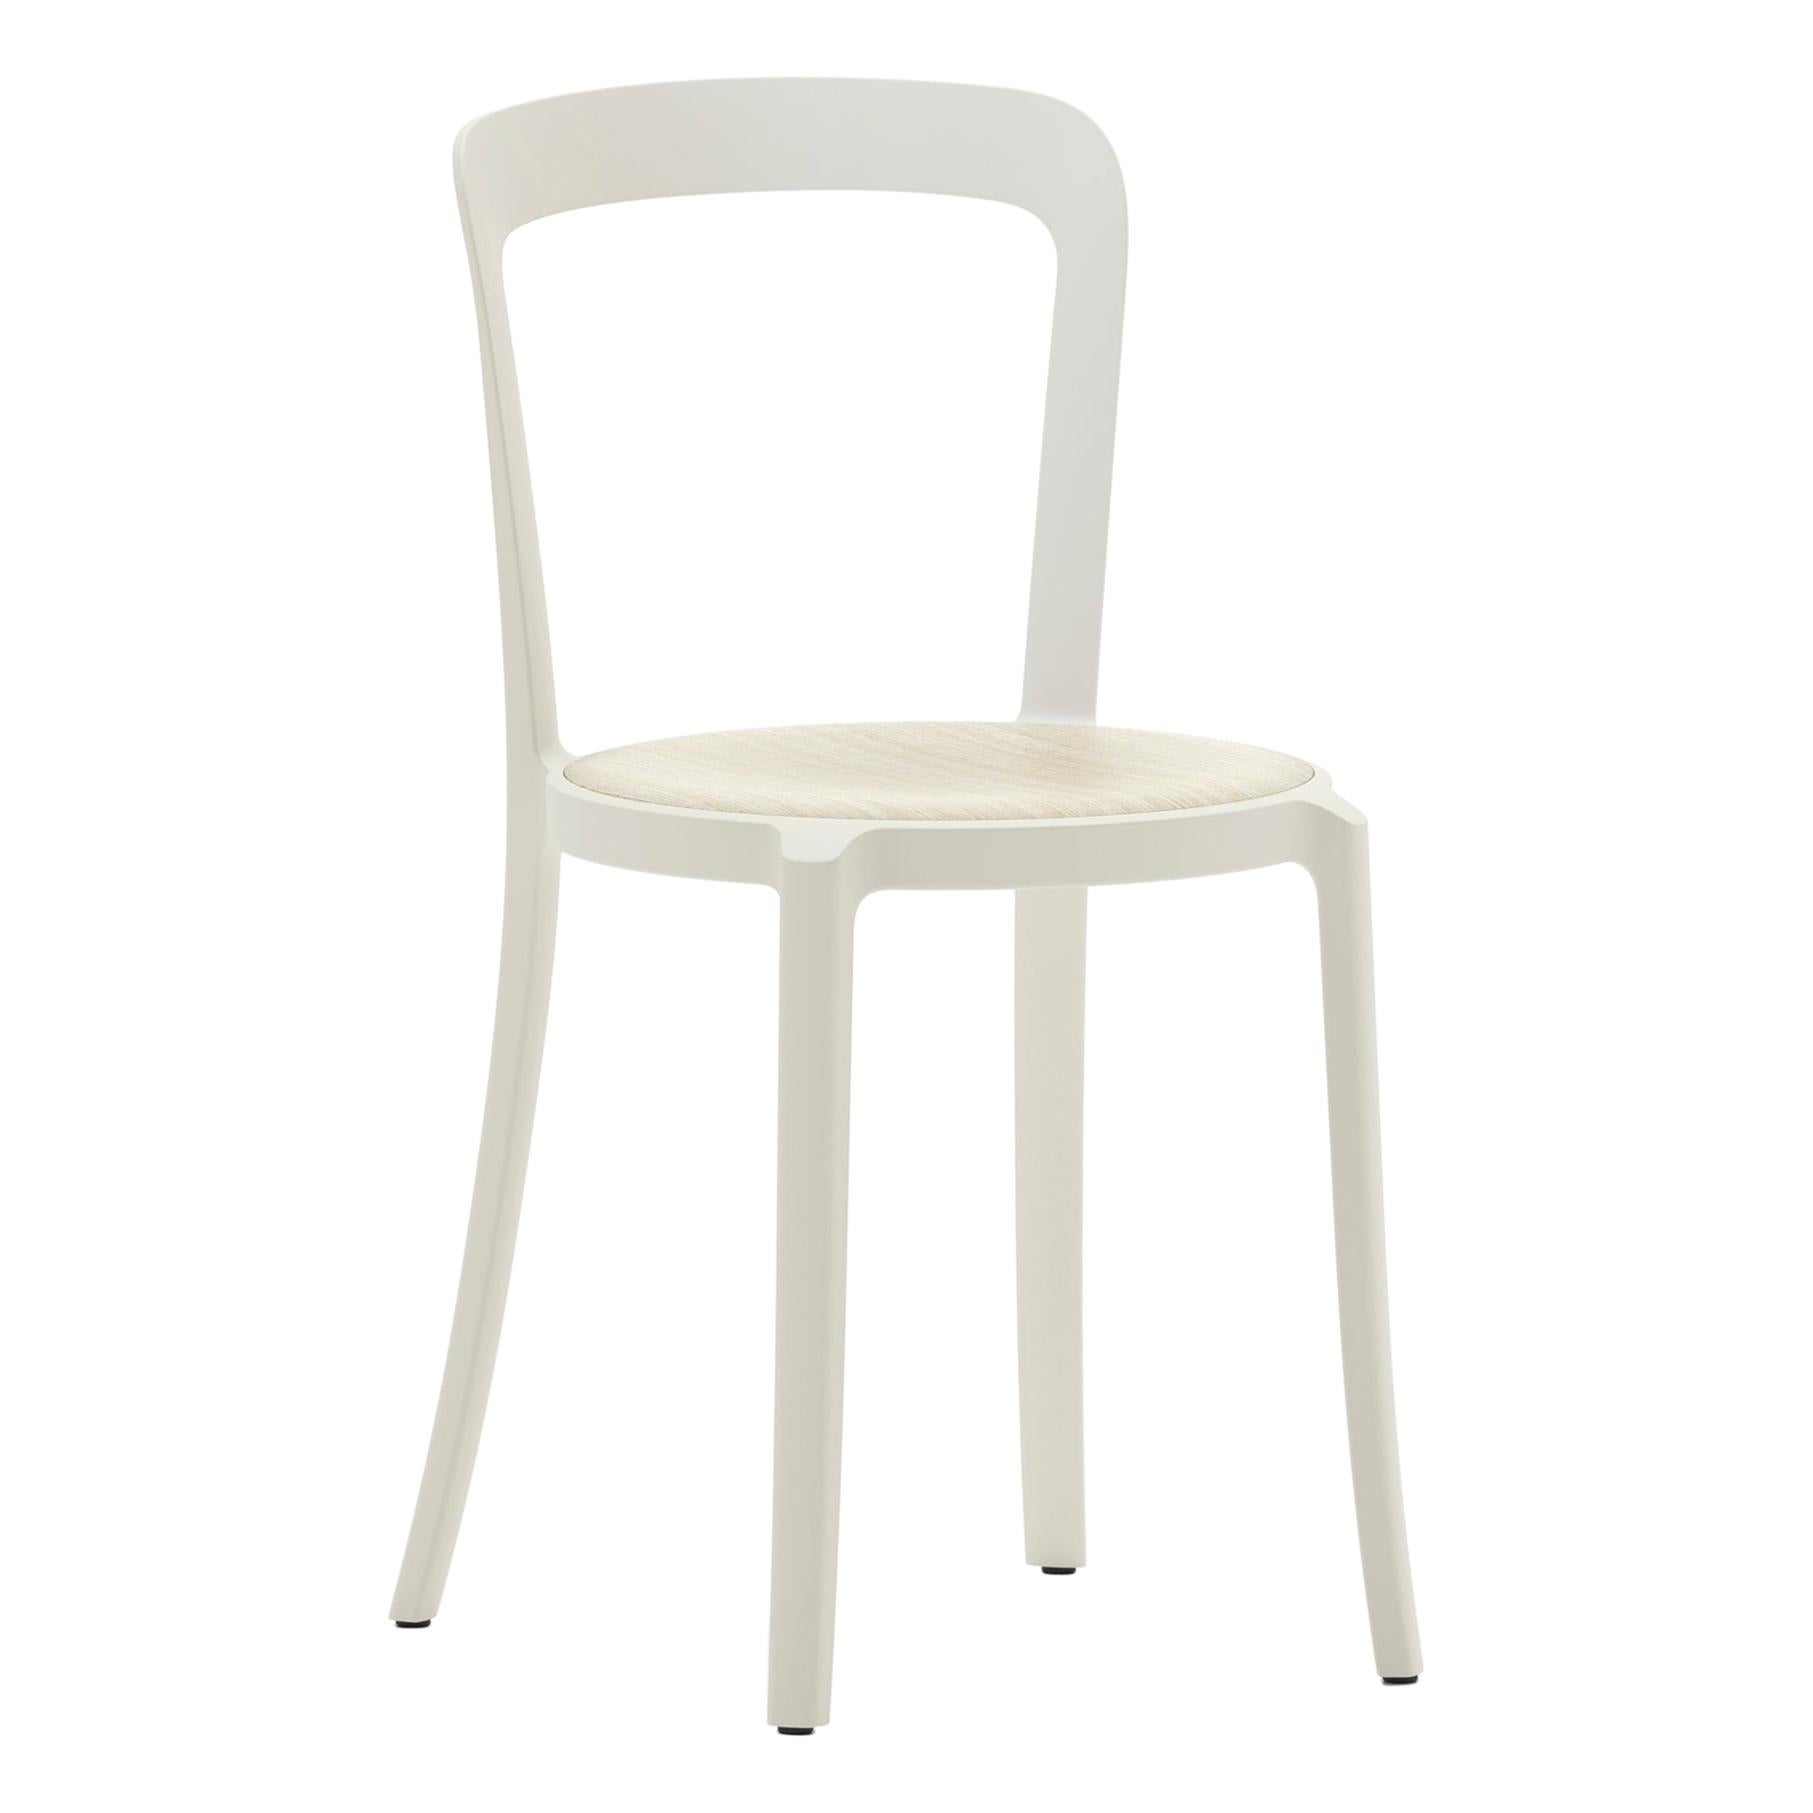 Emeco On & On Stacking Chair in White with Ash Plywood seat by Barber & Osgerby